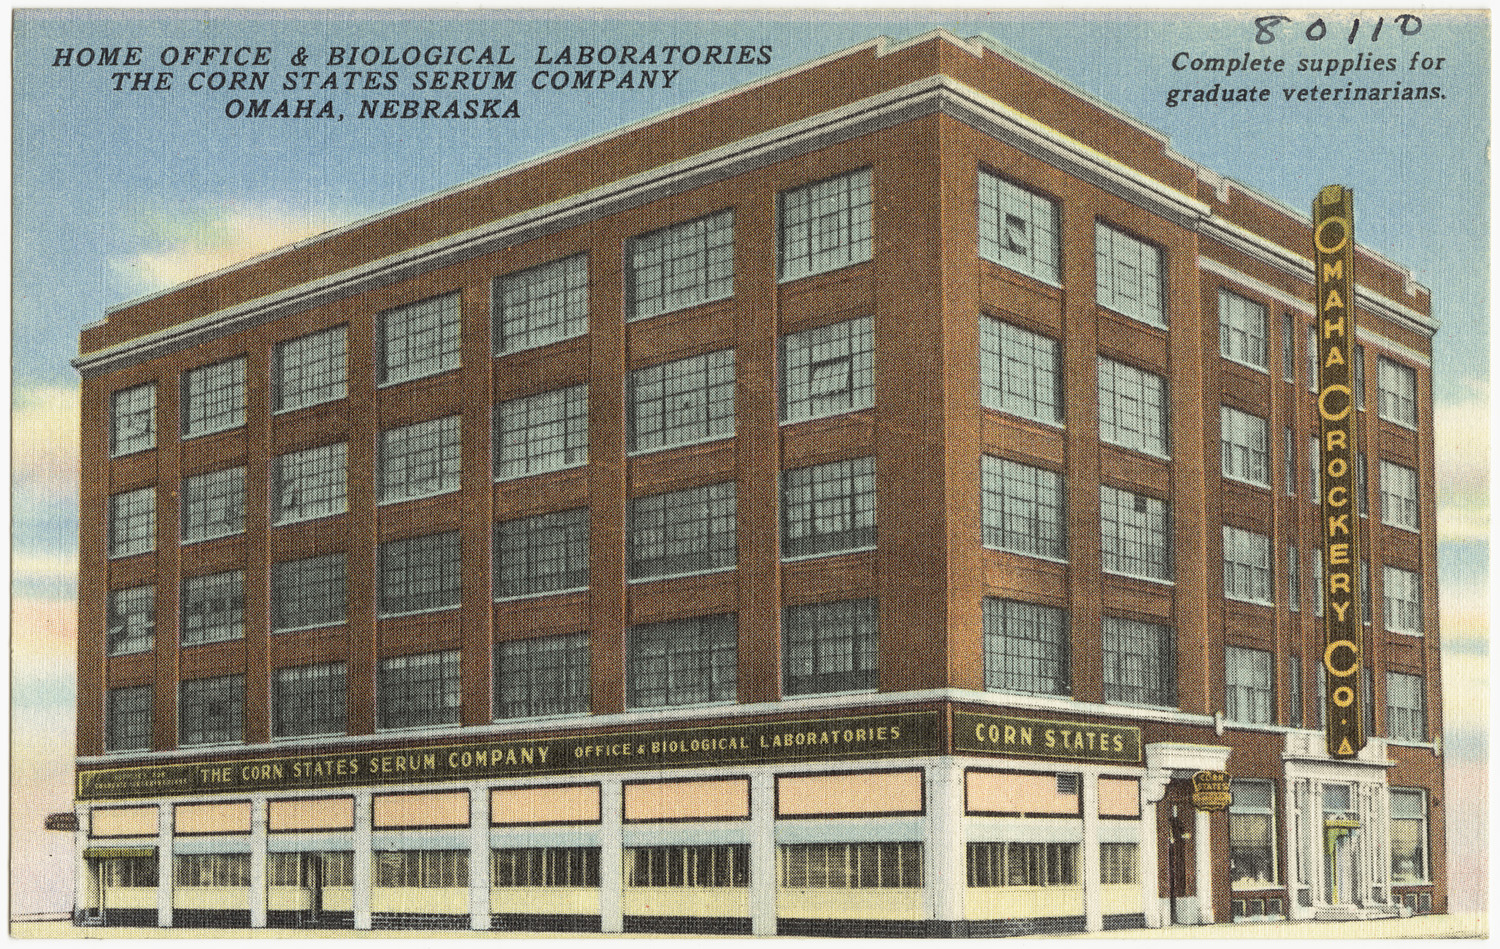 a vintage postcard from the early 20th century depicts a large brick building with windows